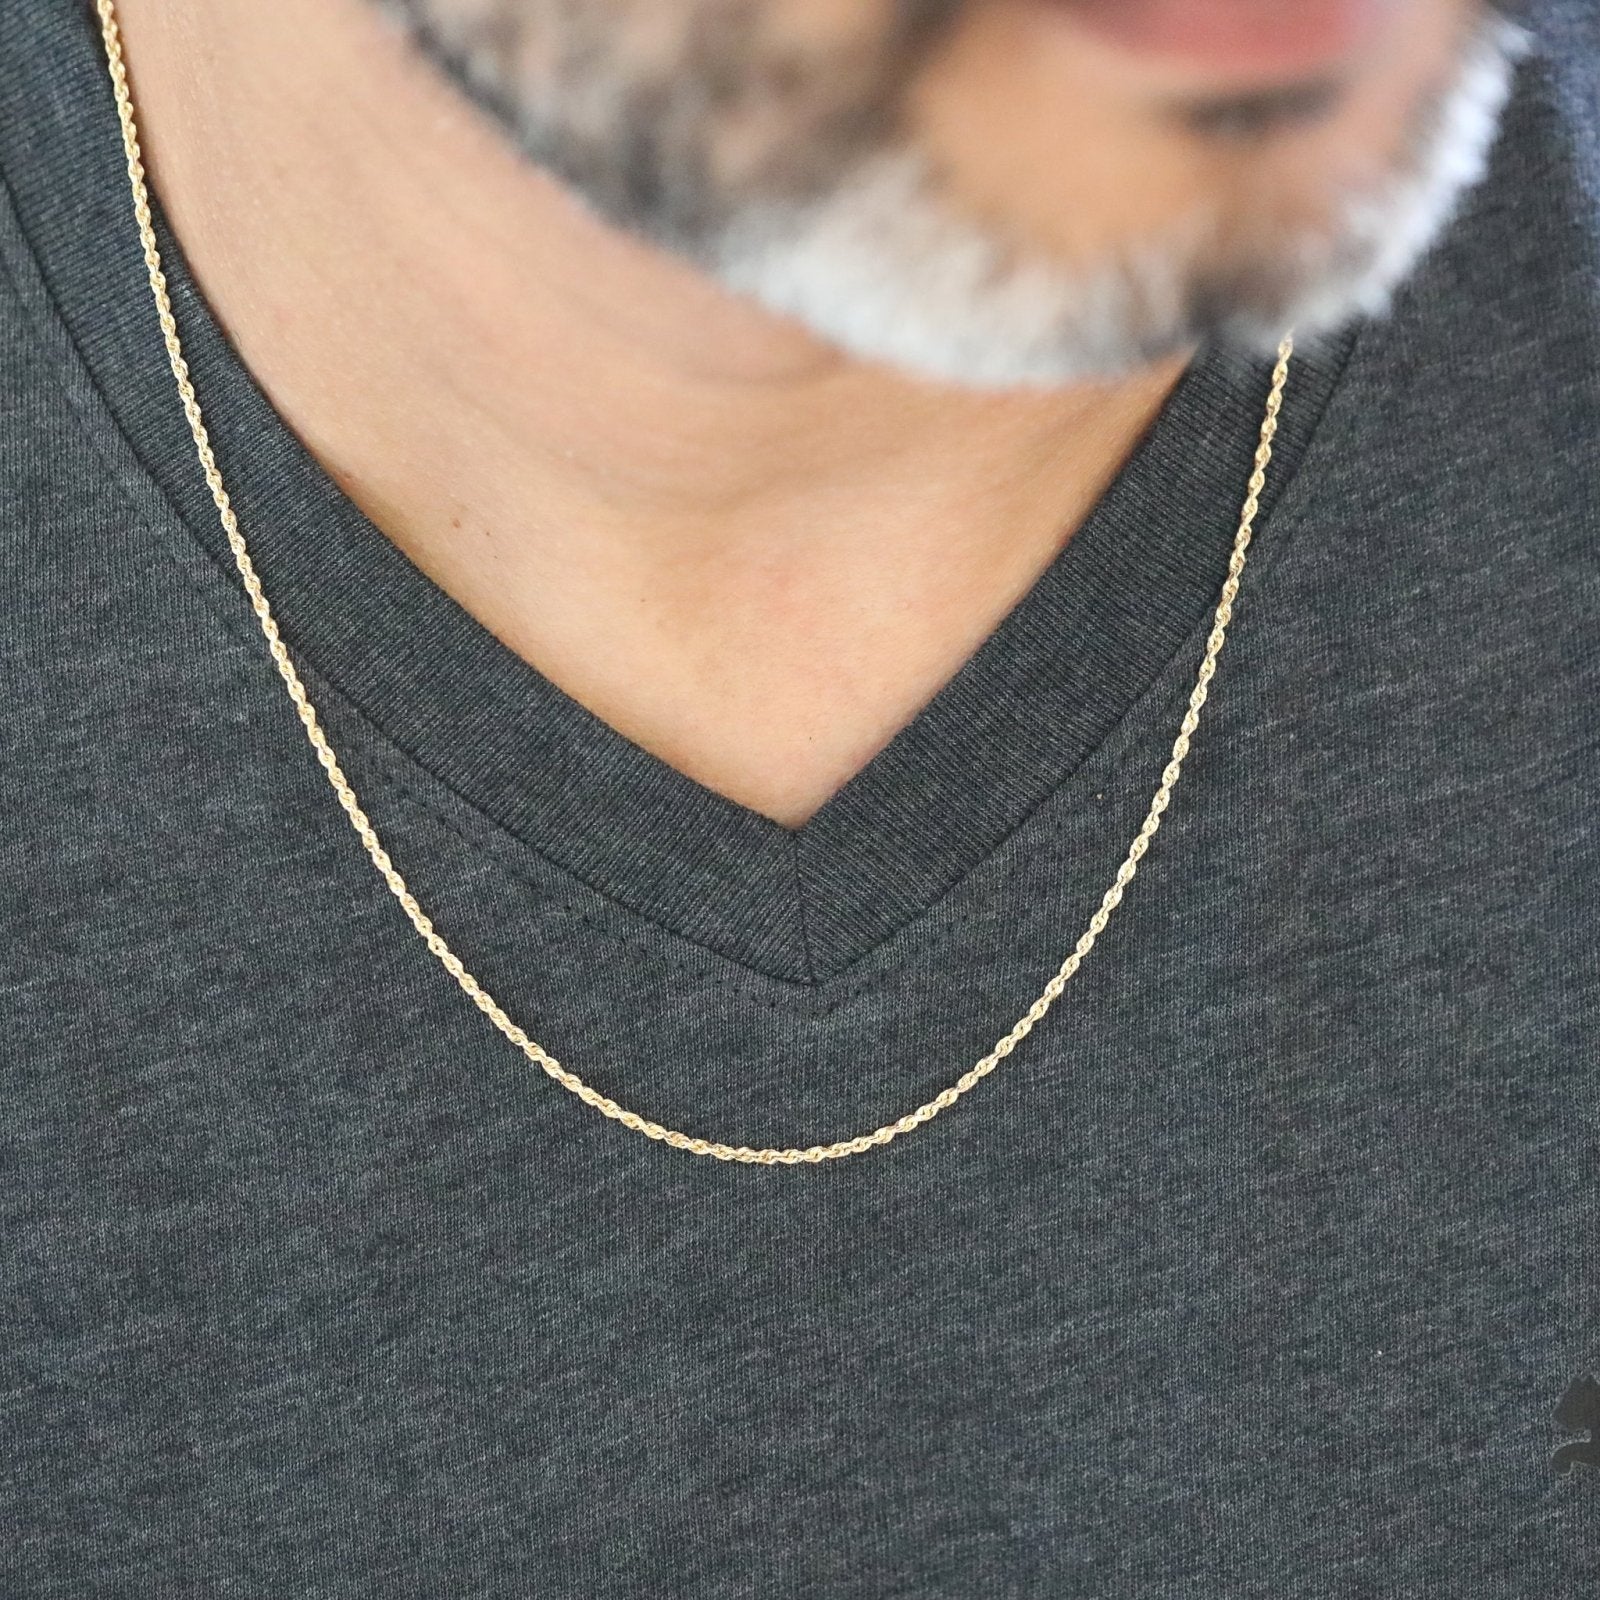 Classic Rope Chain Necklace in Solid 10k Gold Necklaces Estella Collection #product_description# 17845 10k 14k Layering Necklace #tag4# #tag5# #tag6# #tag7# #tag8# #tag9# #tag10# 16" Length